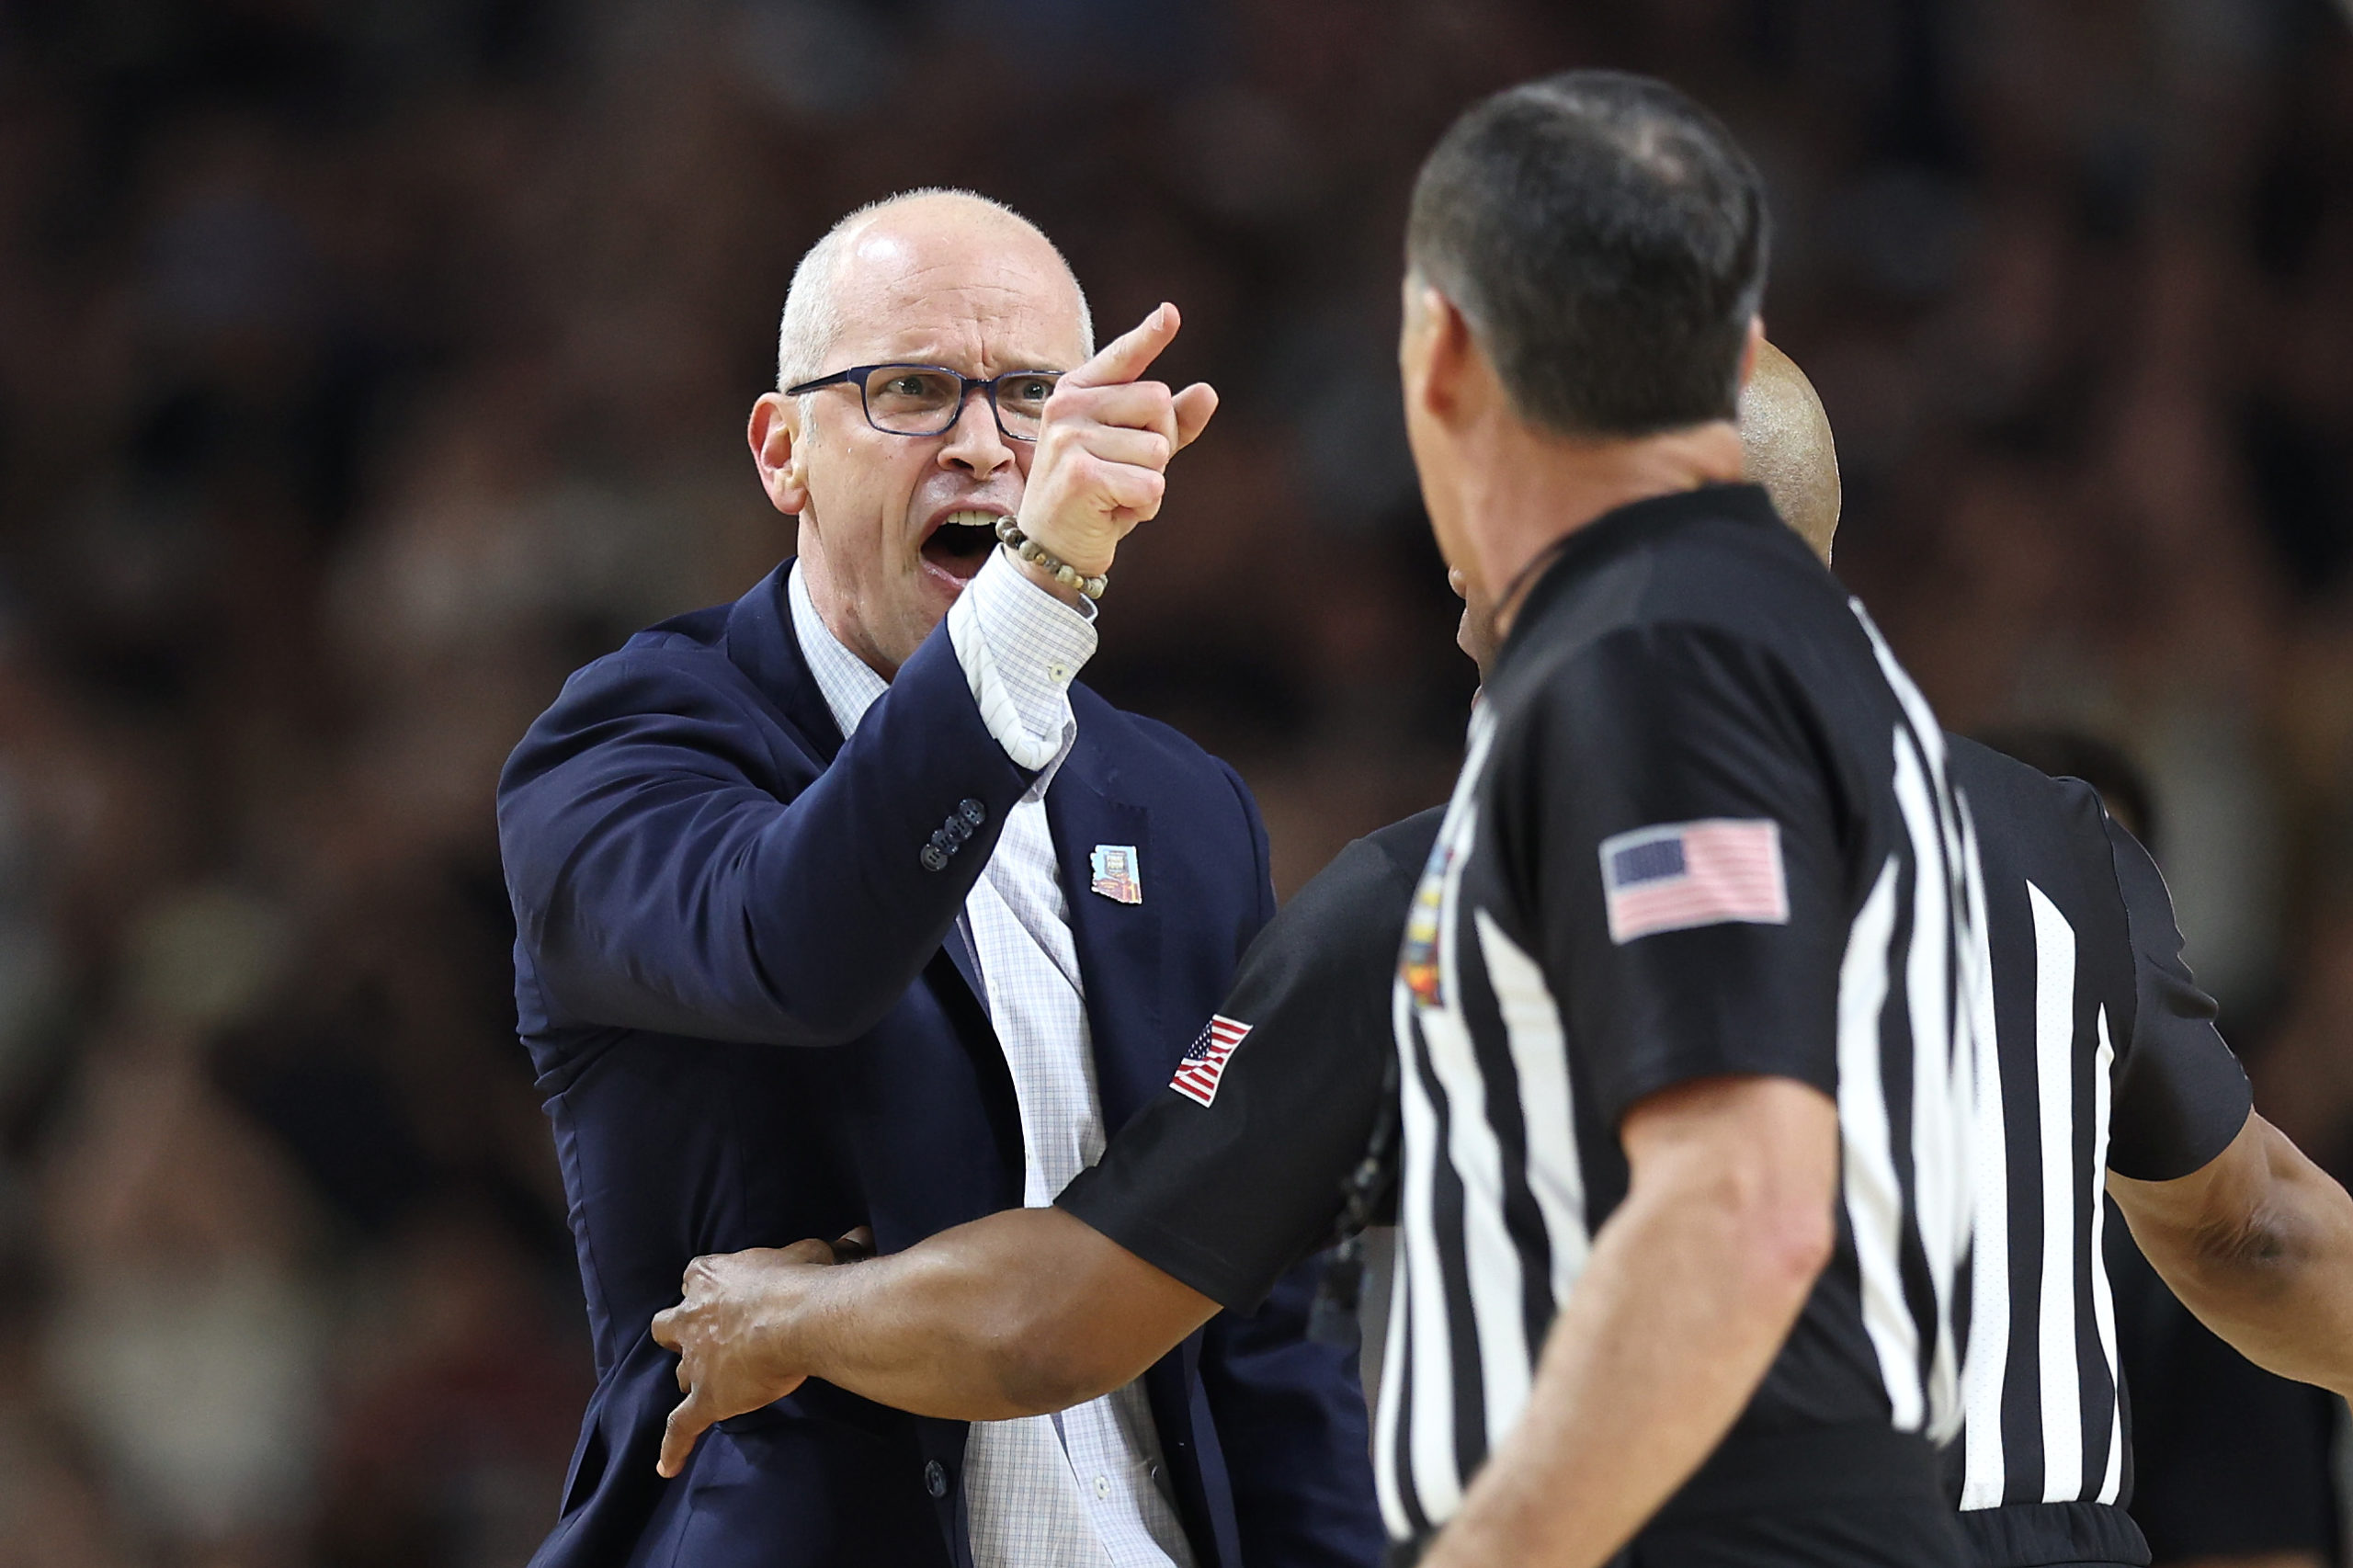 GLENDALE, ARIZONA - APRIL 08: Head coach Dan Hurley of the Connecticut Huskies argues with officials in the first half against the Purdue Boilermakers during the NCAA Men's Basketball Tournament National Championship game at State Farm Stadium on April 08, 2024 in Glendale, Arizona. Jamie Squire/Getty Images